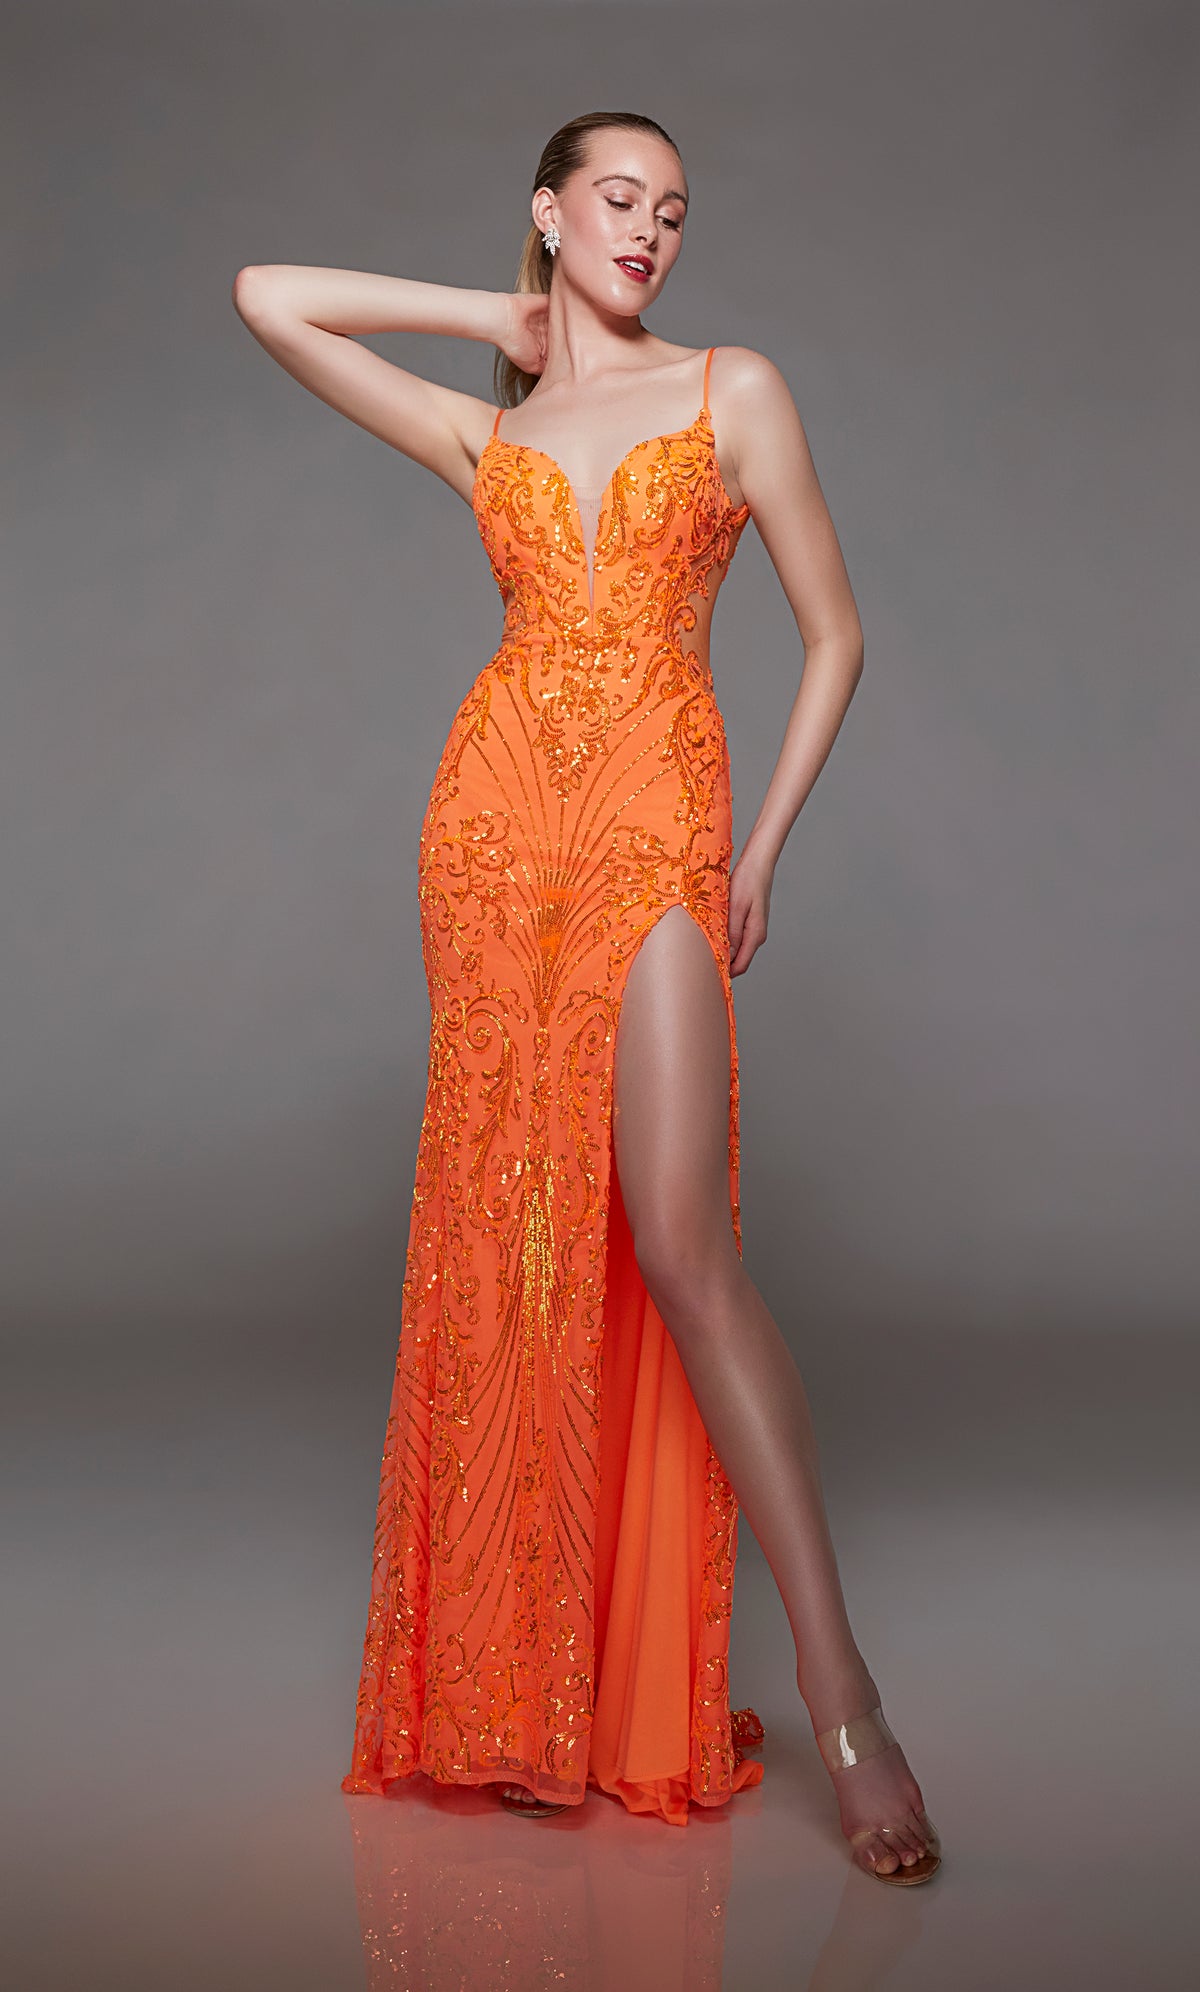 Bright orange sequin formal gown: plunging neckline, front slit, lace-up back, slight train. A stunning choice for an elegant and glamorous occasion.